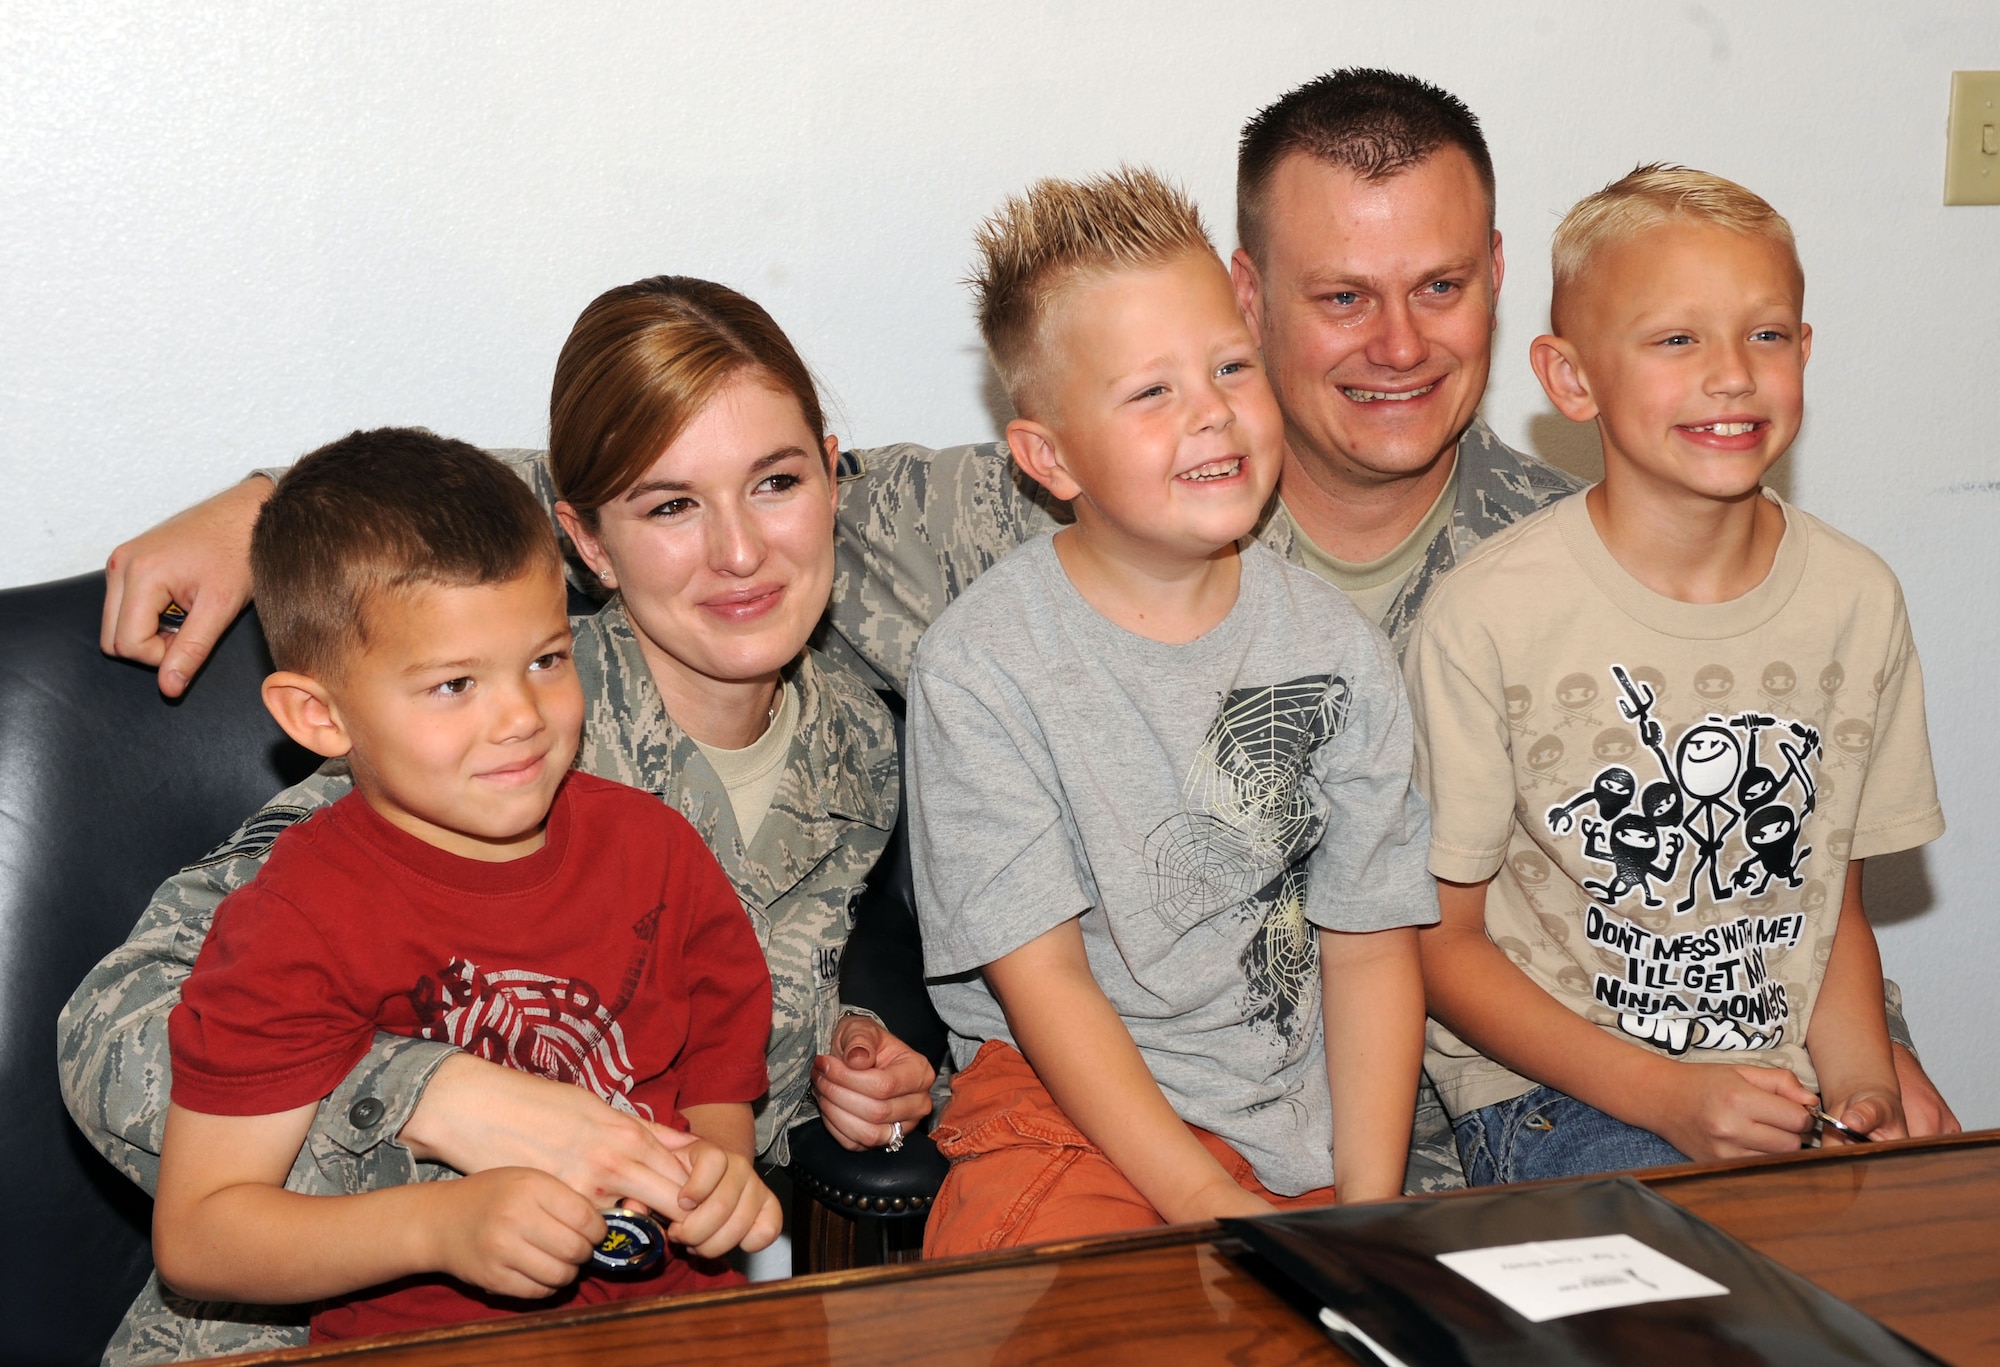 U.S. Air Force Tech. Sgt. Chad Brady, 355th Equipment Maintenance Squadron, poses for a photo with his family in the 355th EMS conference room at Davis-Monthan Air Force Base, Ariz., May 10, 2013. Brady is to be honored as the D-M Father of the Year in June 2013. (U.S. Air Force photo by Senior Airman Timothy Moore/Released)